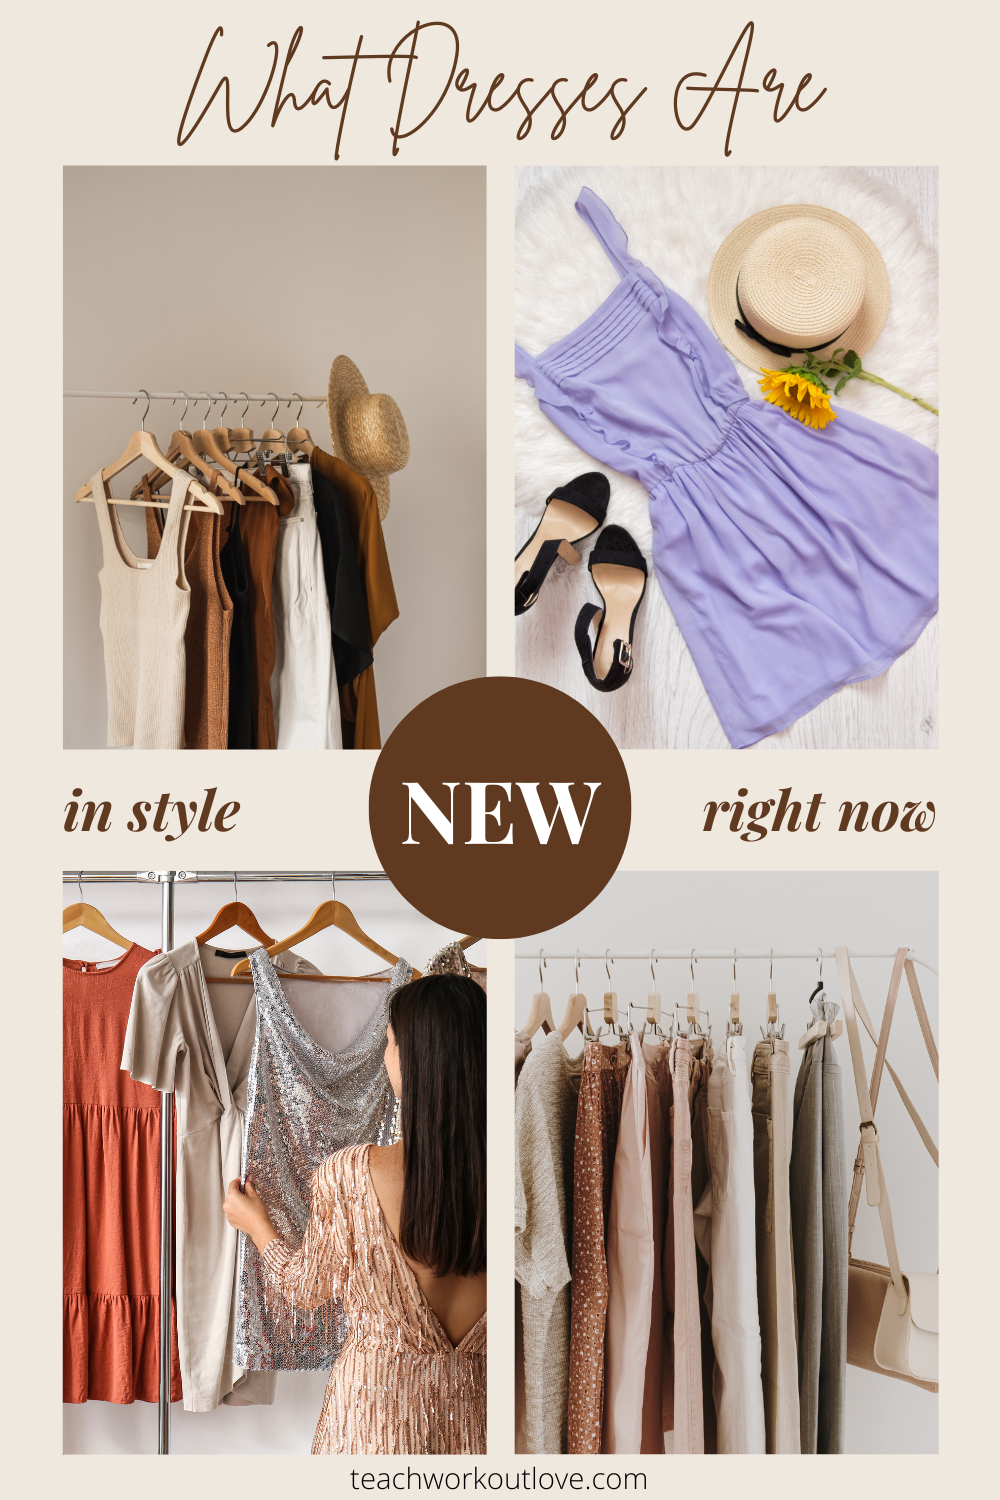 Below you will find recommendations on which dresses for women to invest in to stay stylish for several seasons in a row.